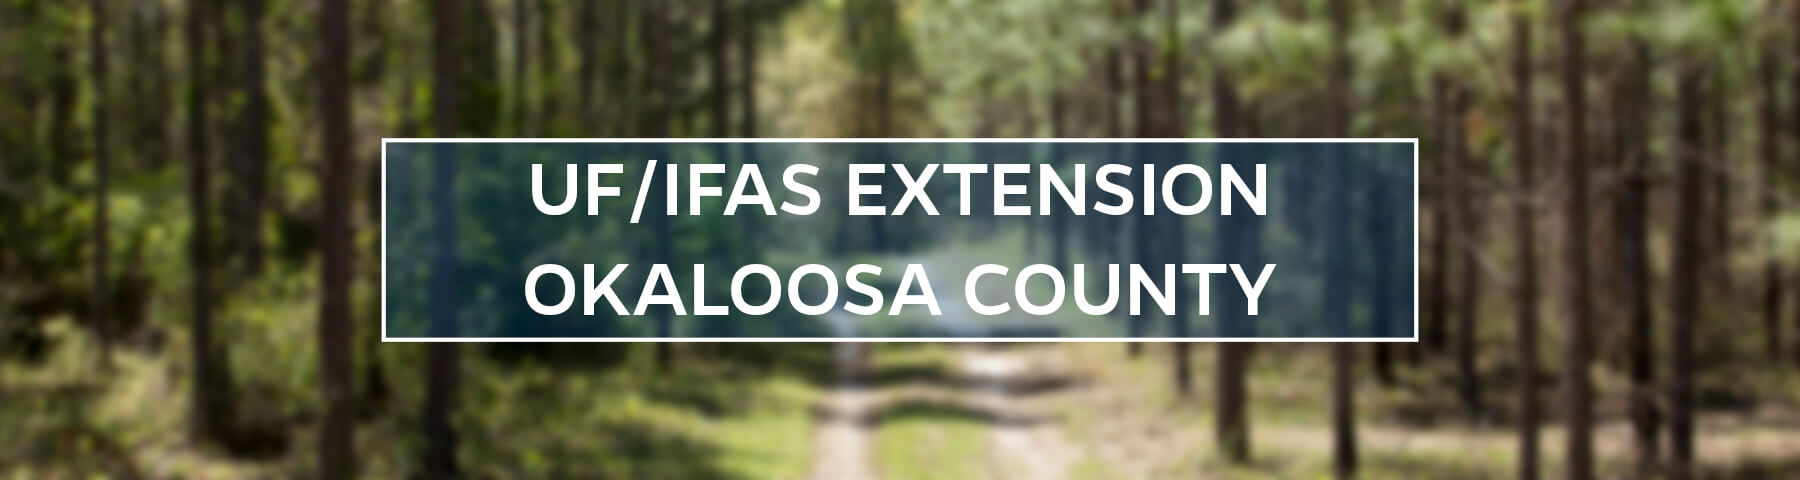 UF/IFAS Extension Okaloosa County